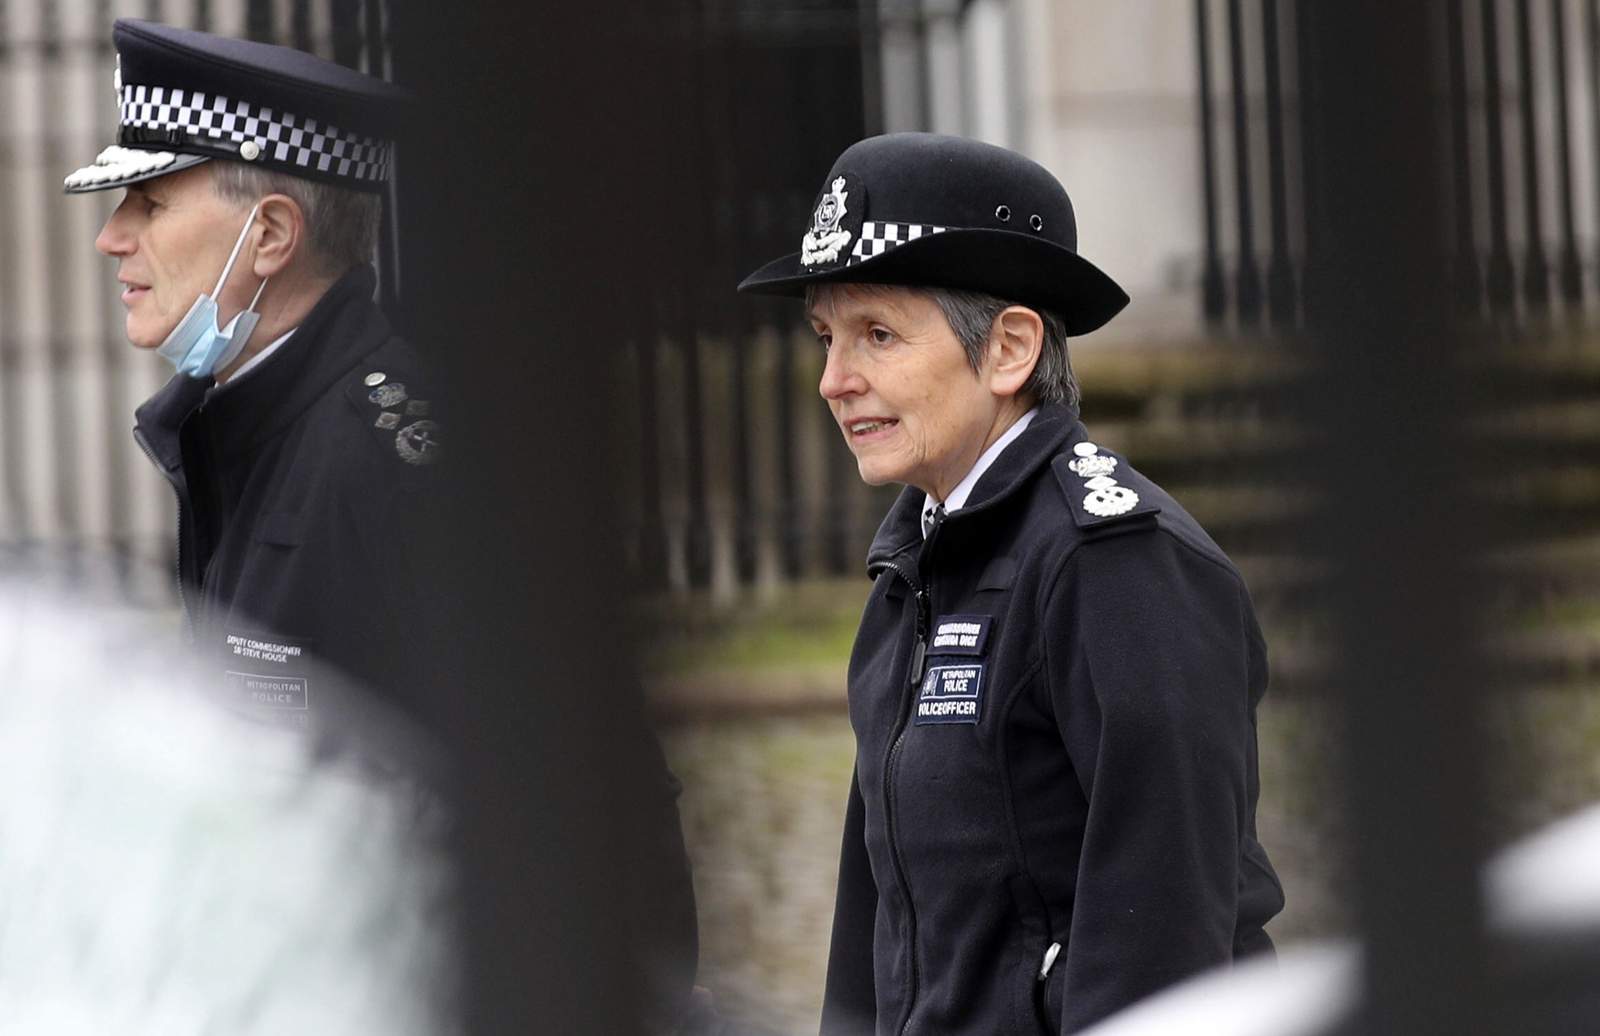 London police chief says she won't quit after vigil clashes